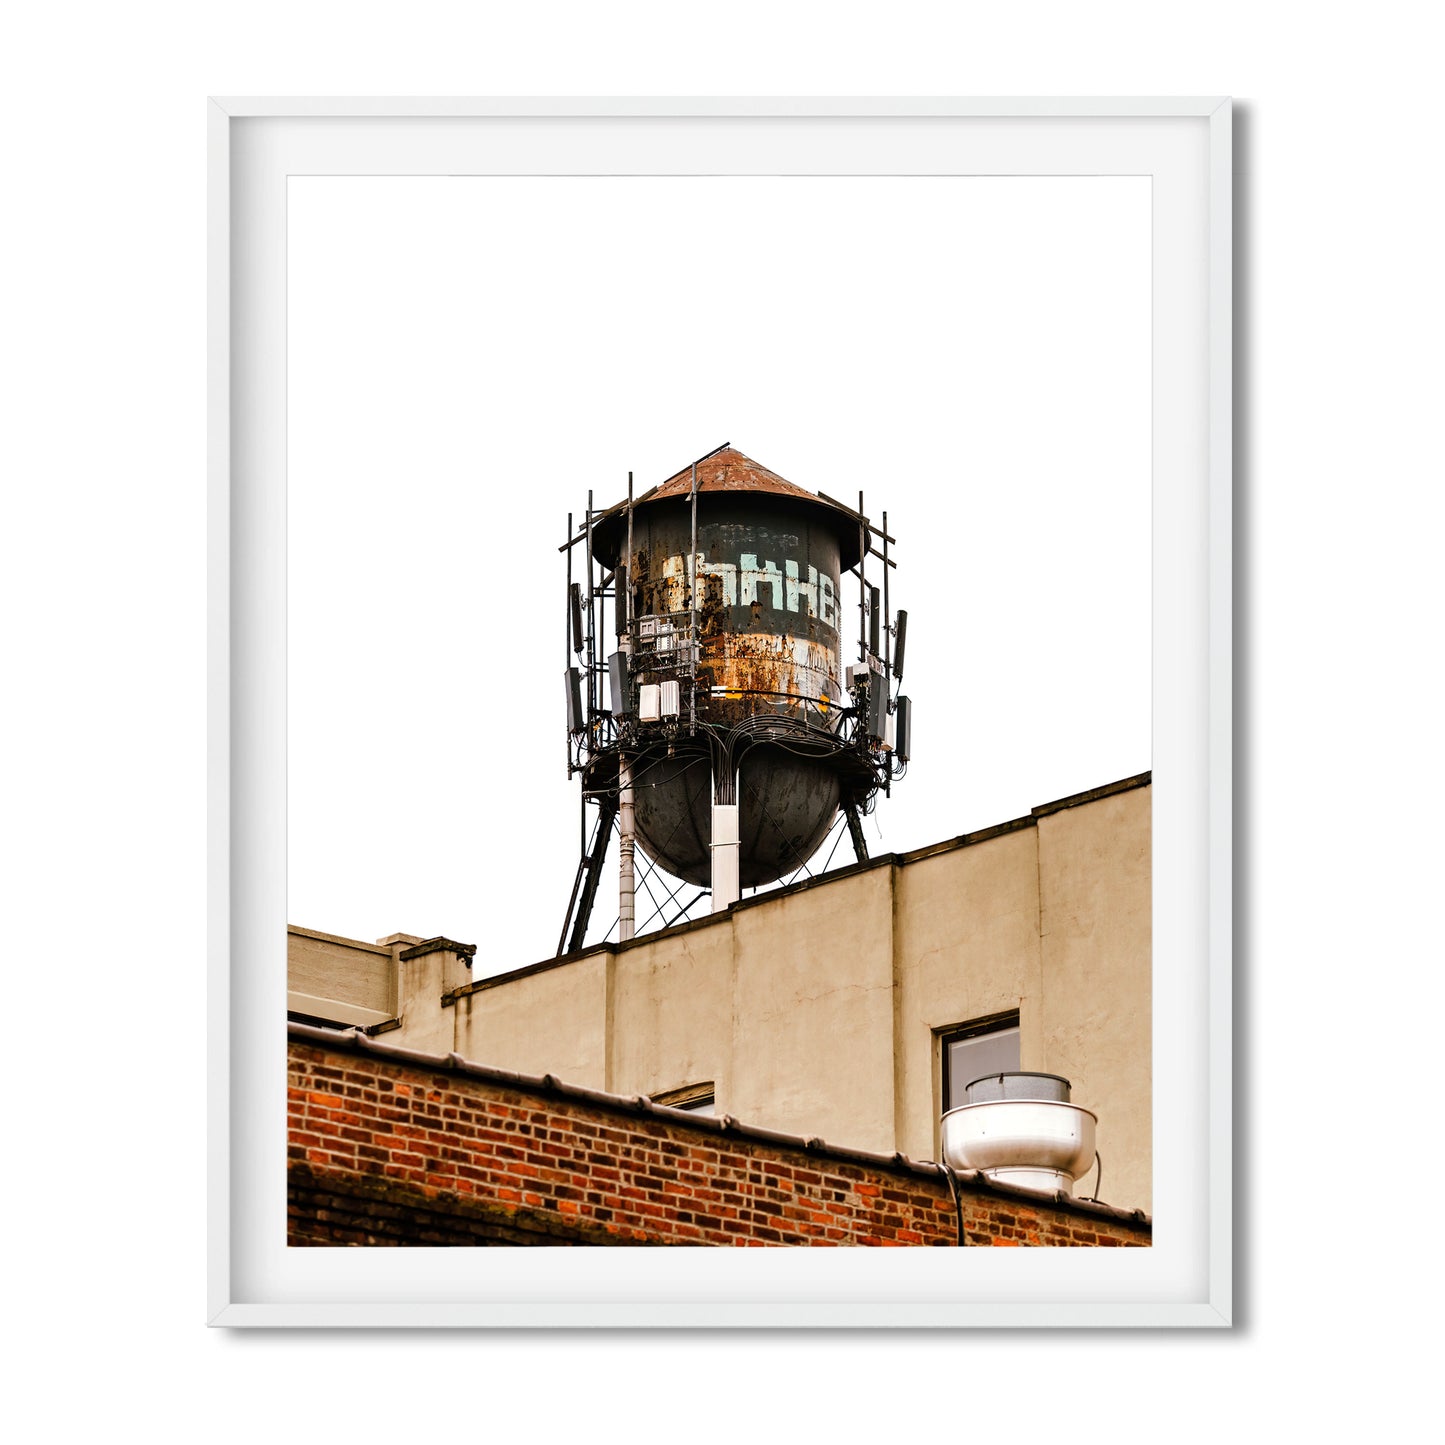 Water Tower in Greenpoint, Brooklyn 2023